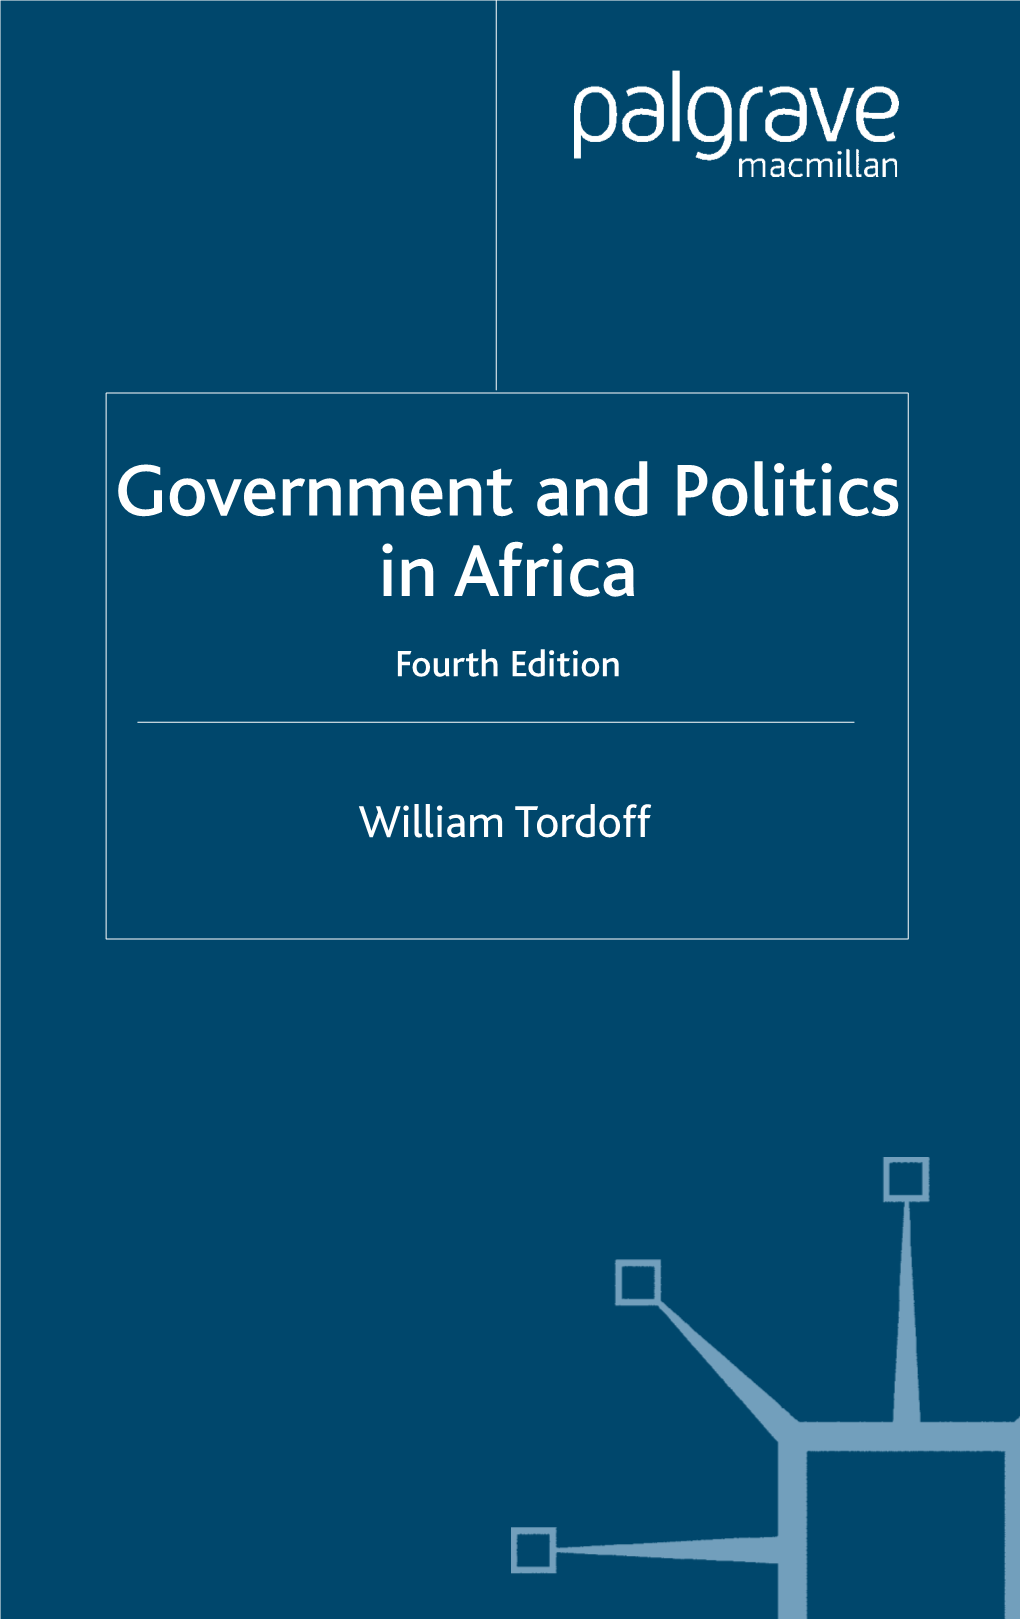 Government and Politics in Africa Fourth Edition